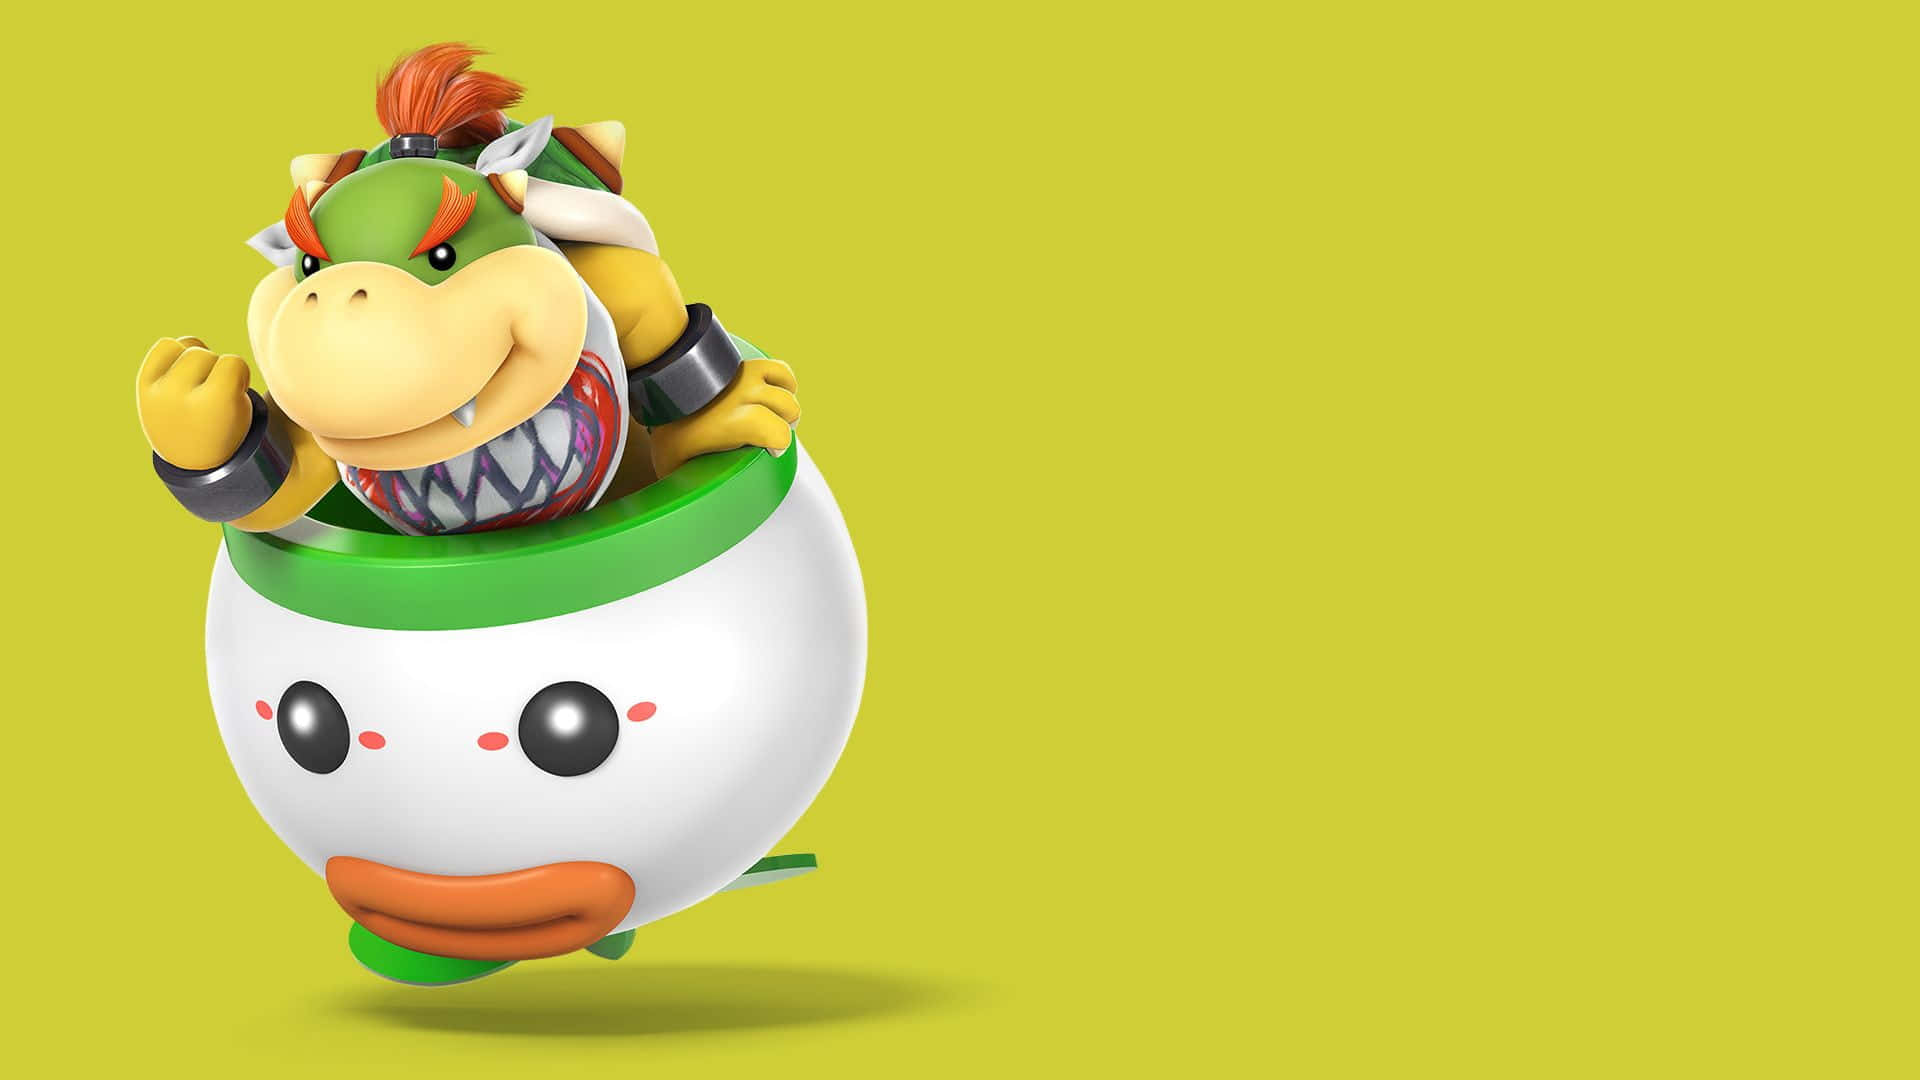 Bowser Jr. in action on an epic background Wallpaper